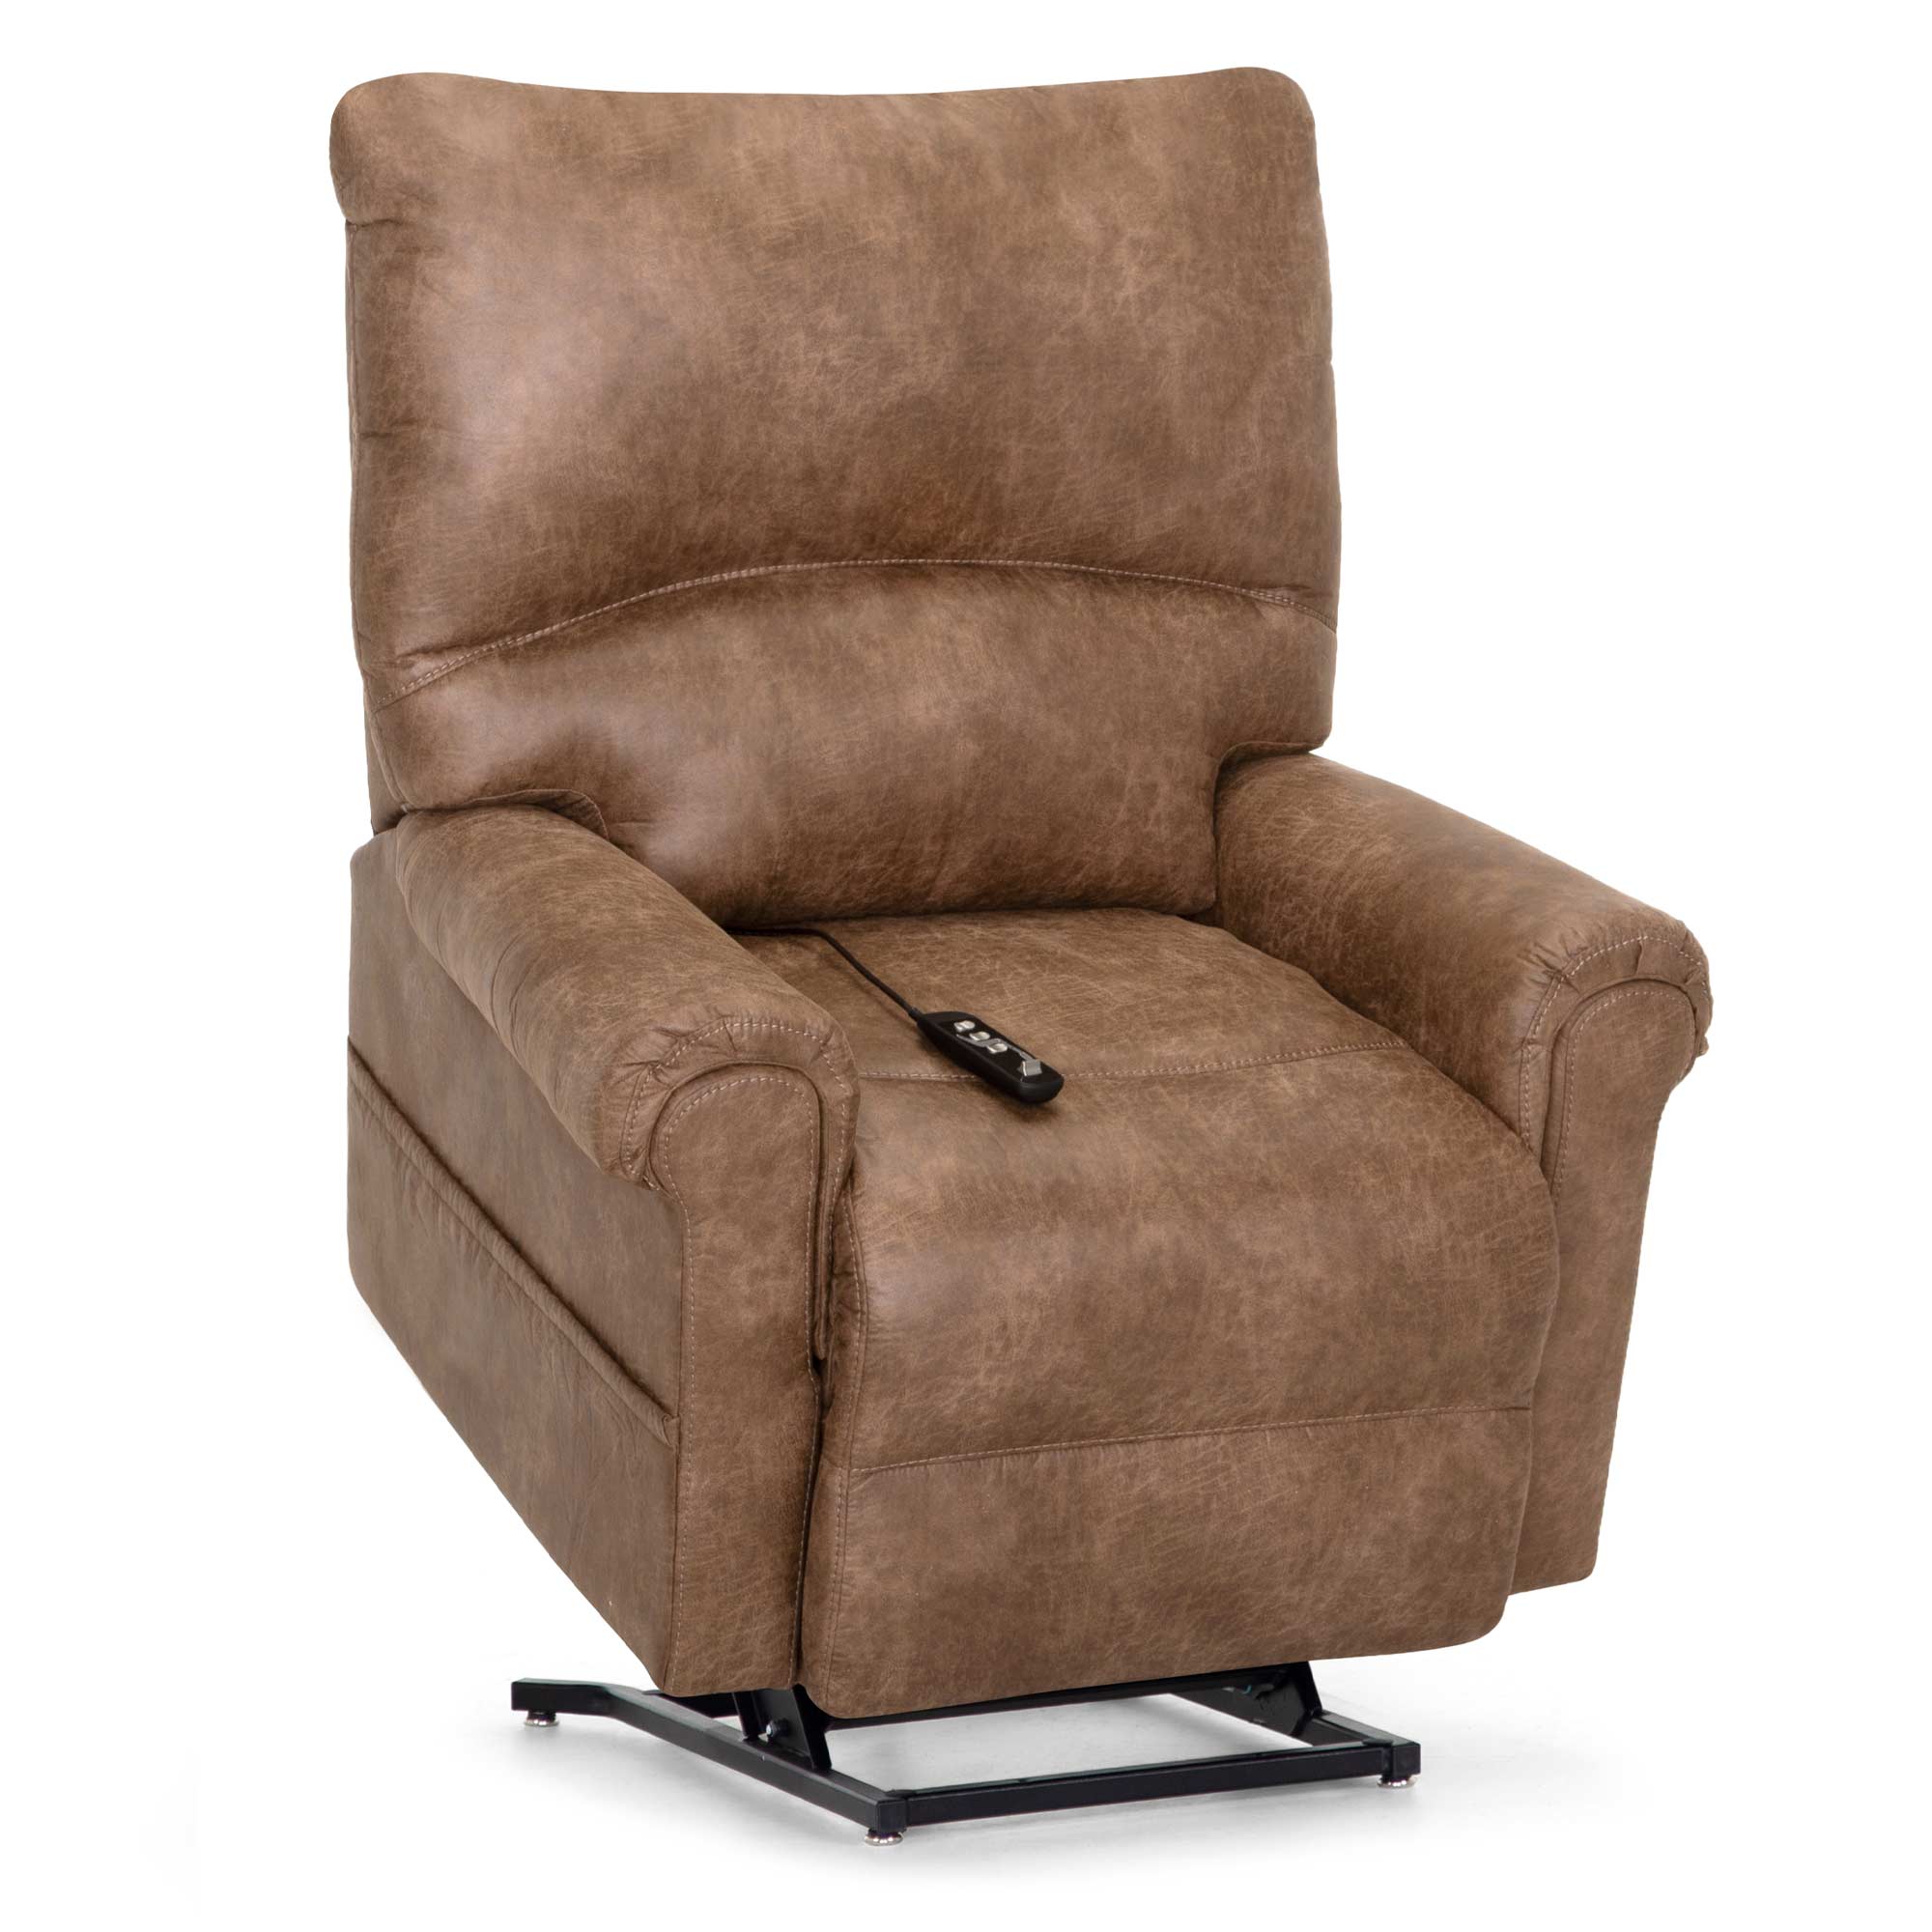 Pride LC-358PW Petite Wide Heritage Collection Lift Chair